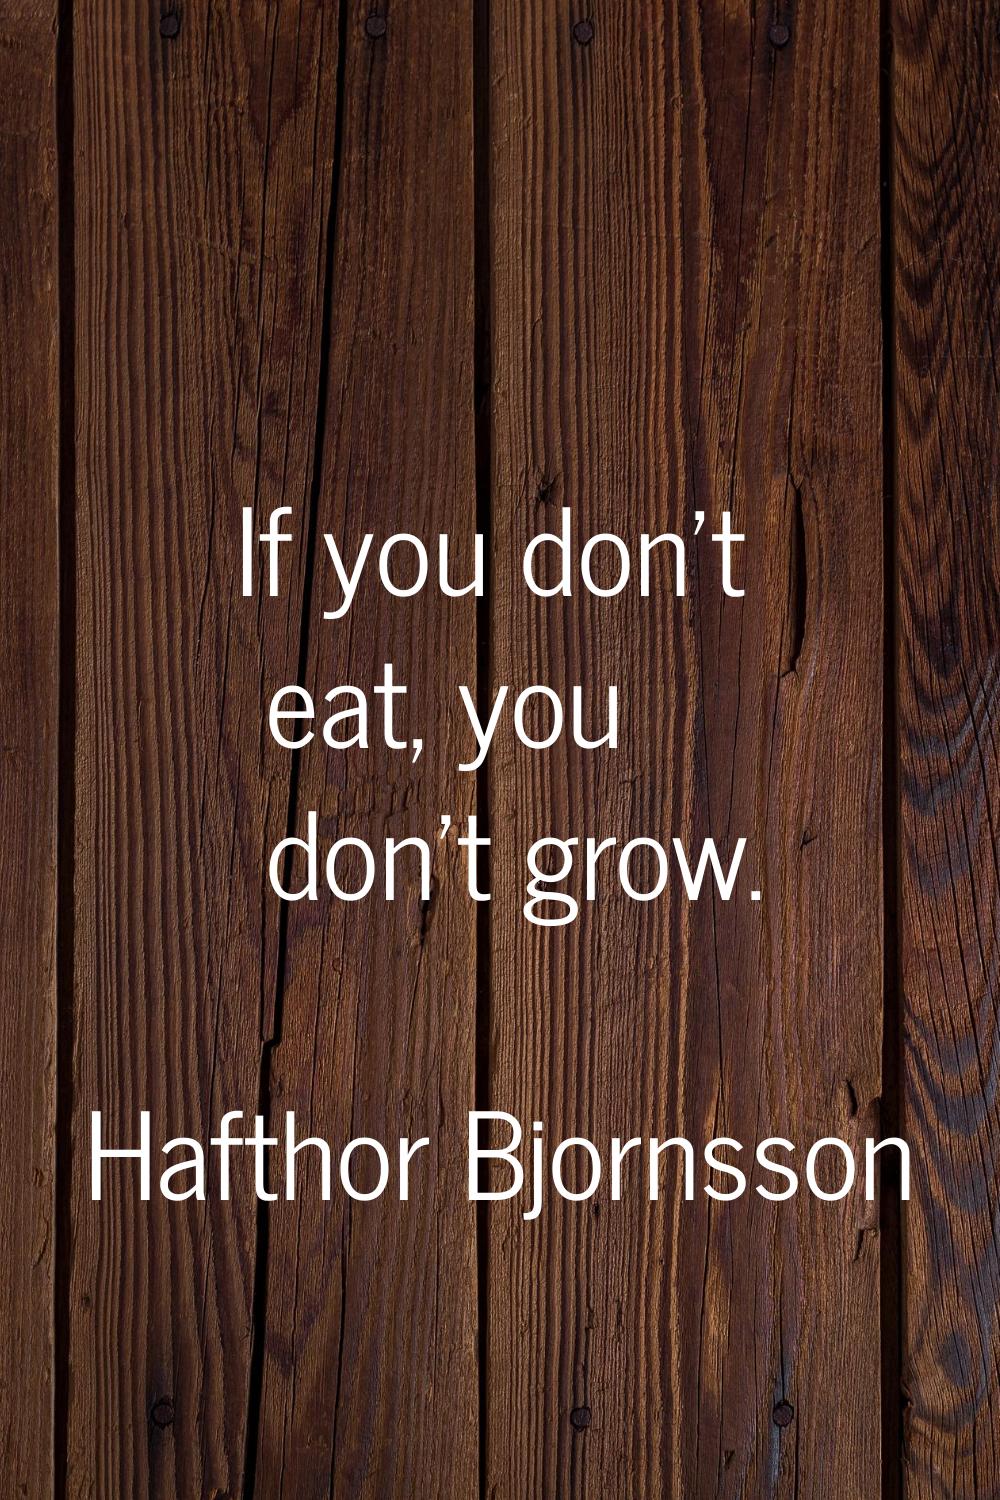 If you don't eat, you don't grow.